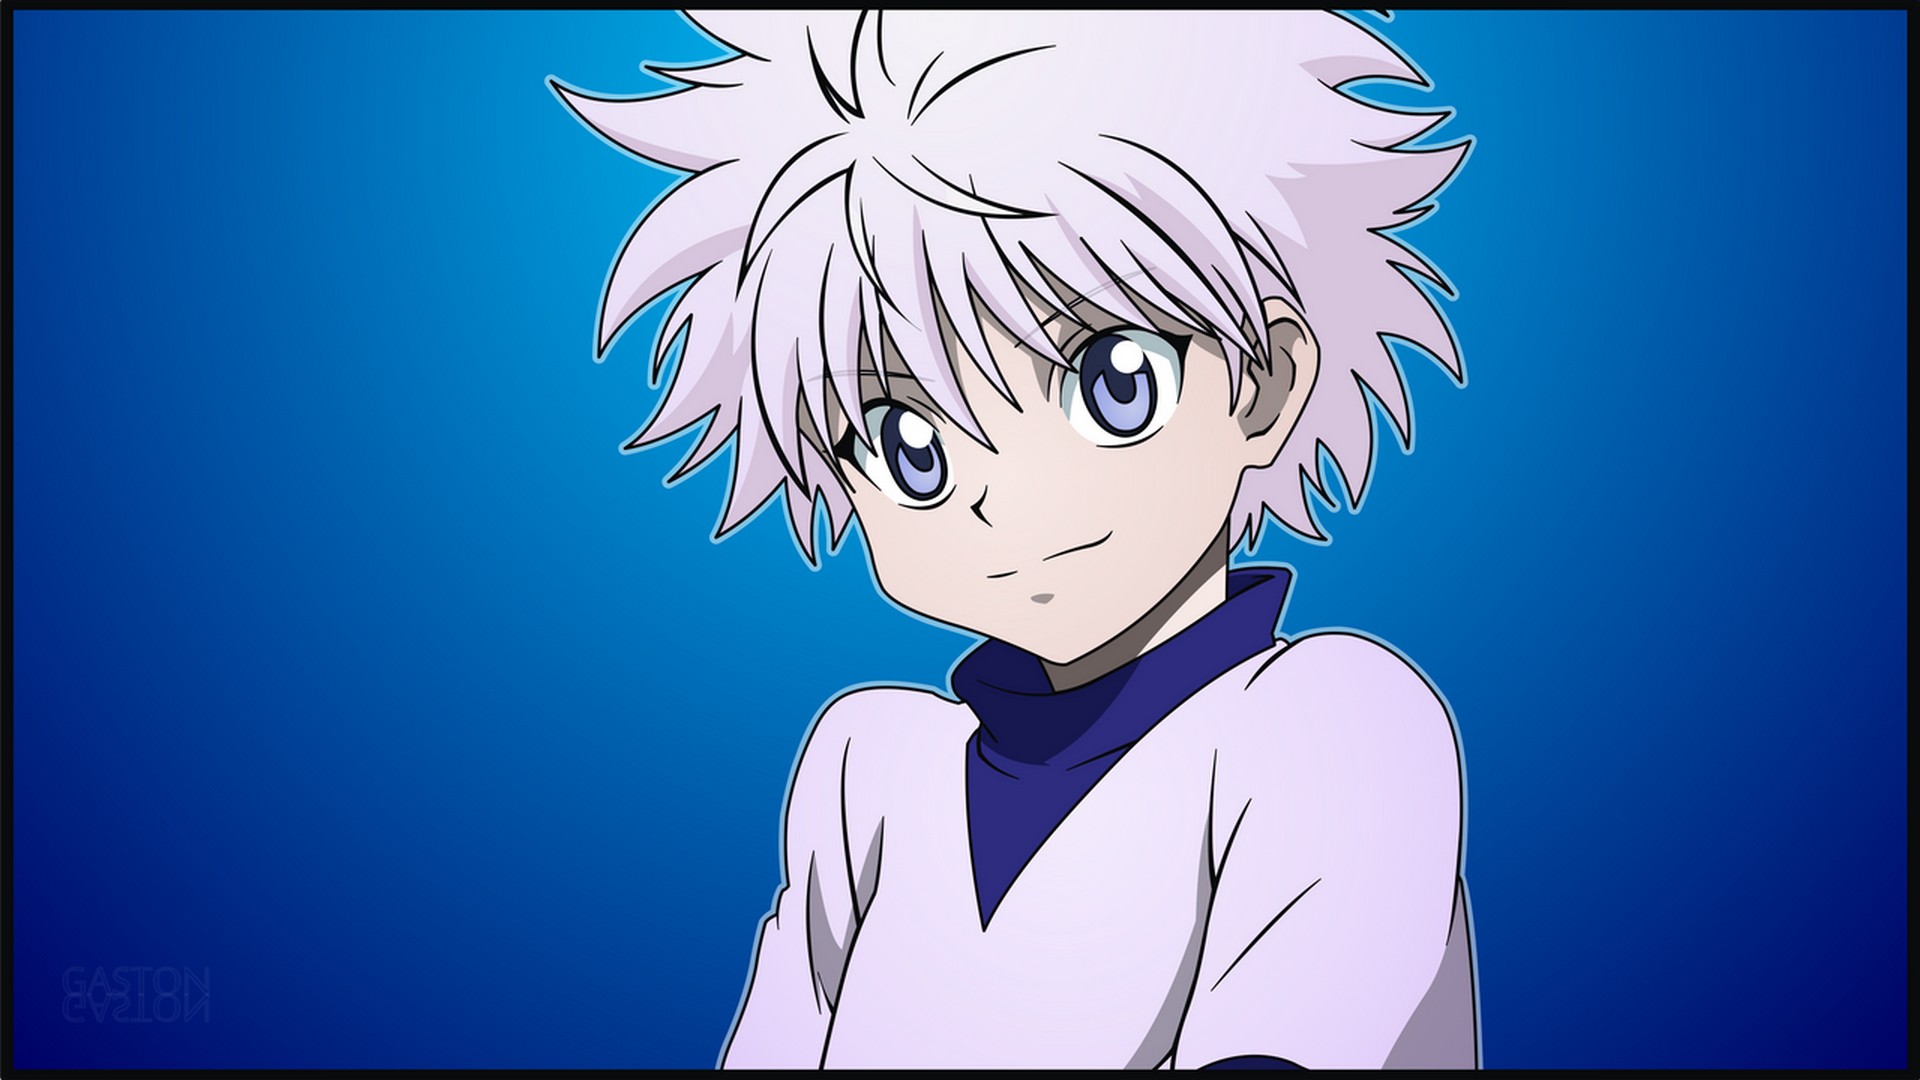 Killua Full Movie Wallpaper with high-resolution 1920x1080 pixel. You can use this poster wallpaper for your Desktop Computers, Mac Screensavers, Windows Backgrounds, iPhone Wallpapers, Tablet or Android Lock screen and another Mobile device